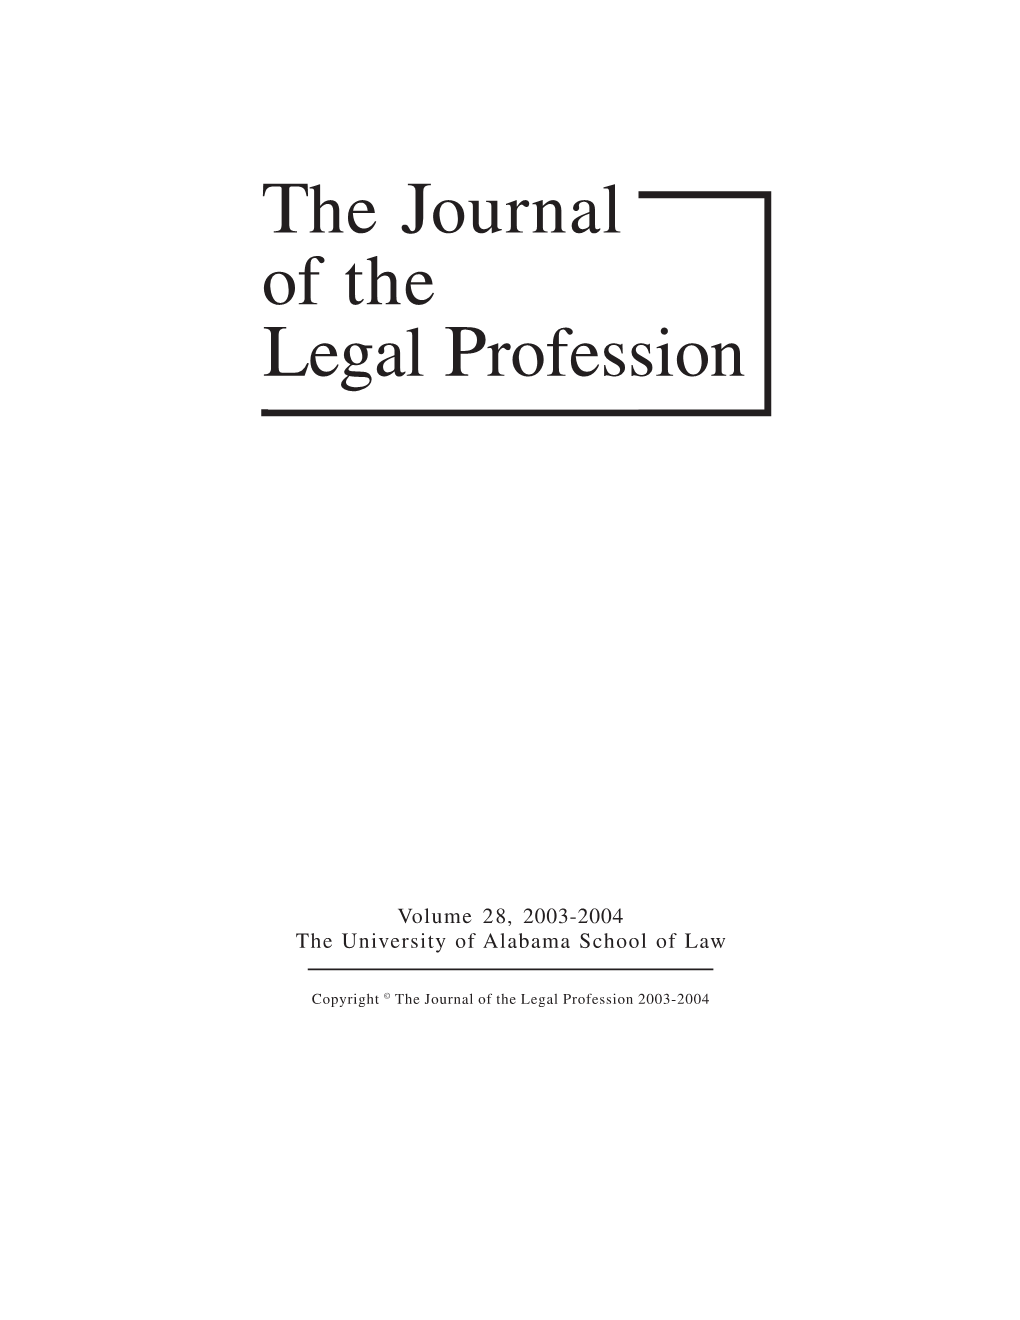 The Journal of the Legal Profession